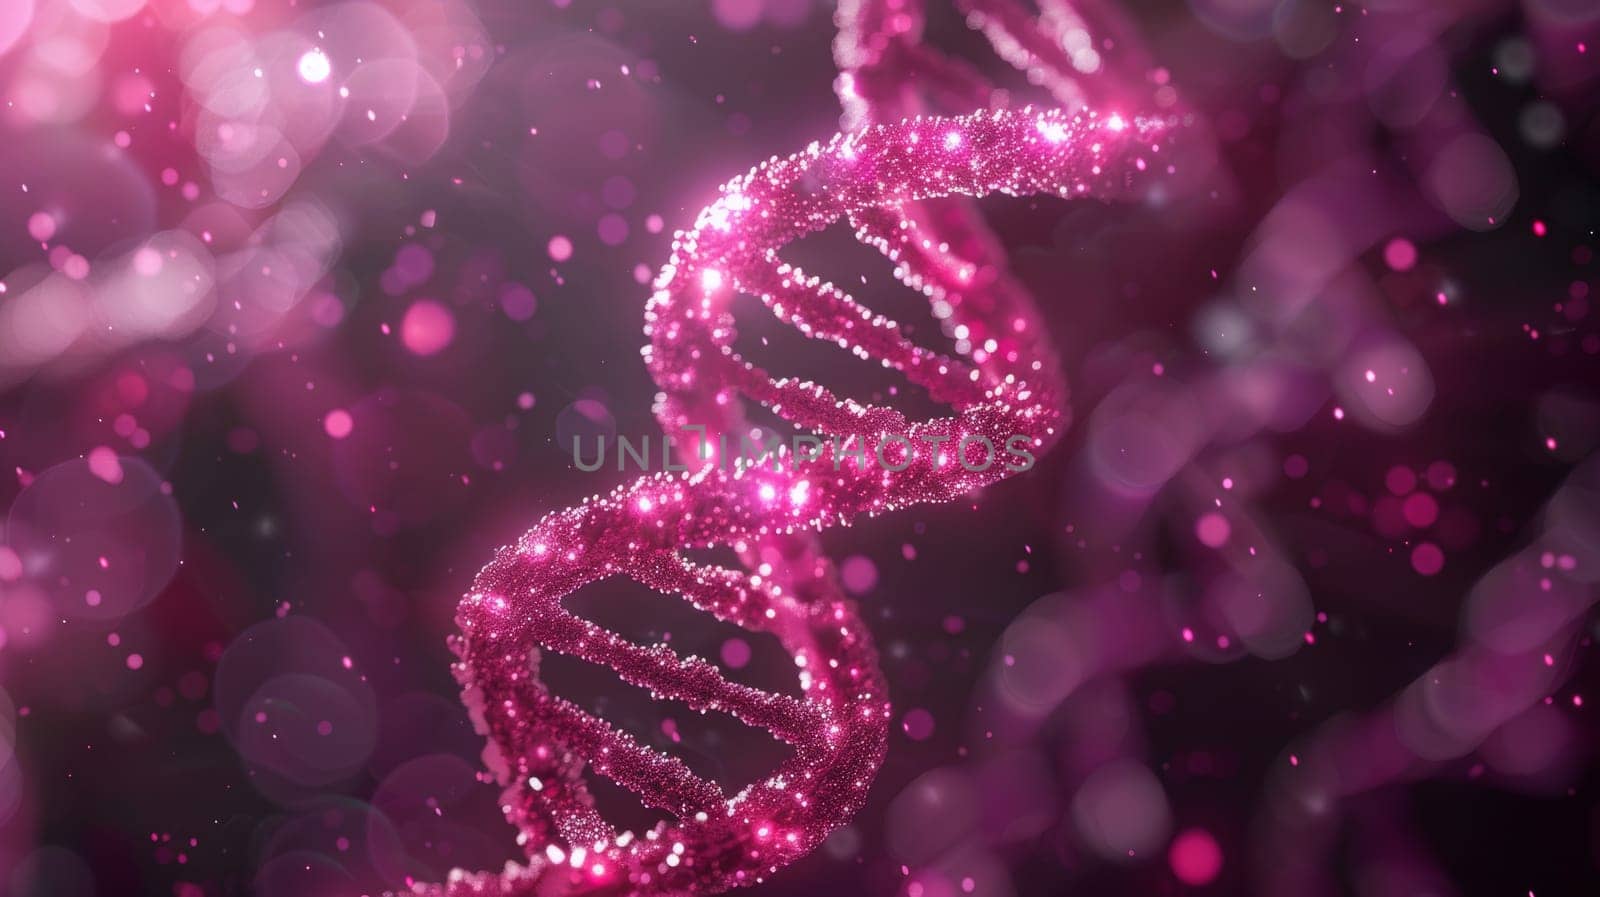 Glowing pink DNA double helix strands with bokeh background. Concept of genetic engineering, science research, and discovery. by ailike